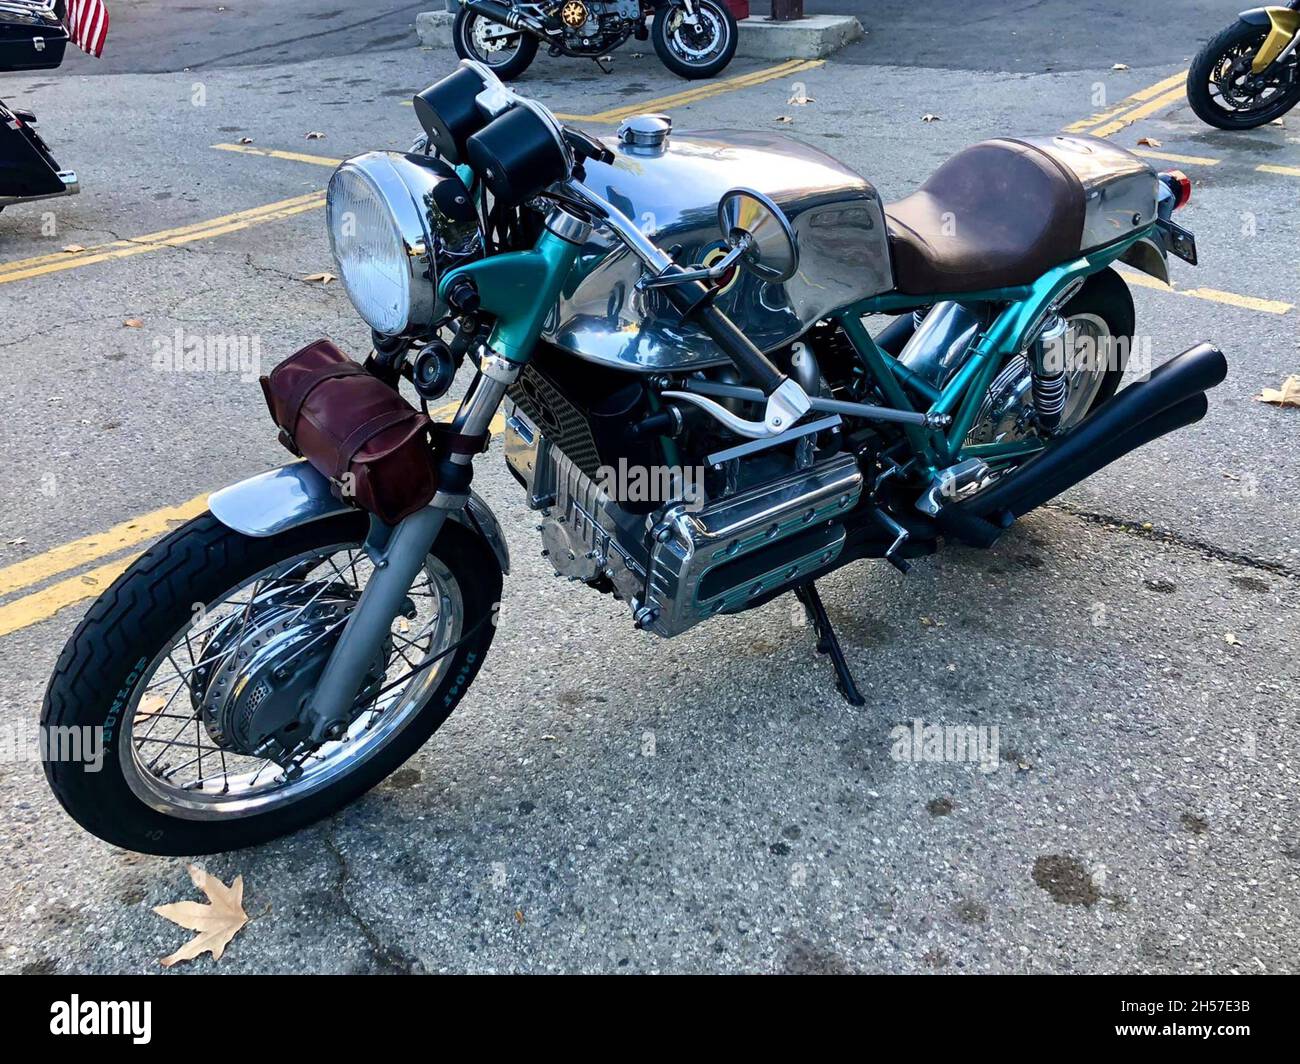 Antique BMW motorcycle, customized in chrome and green. Parked next to other motorcycles. Los Angeles, United States. Stock Photo